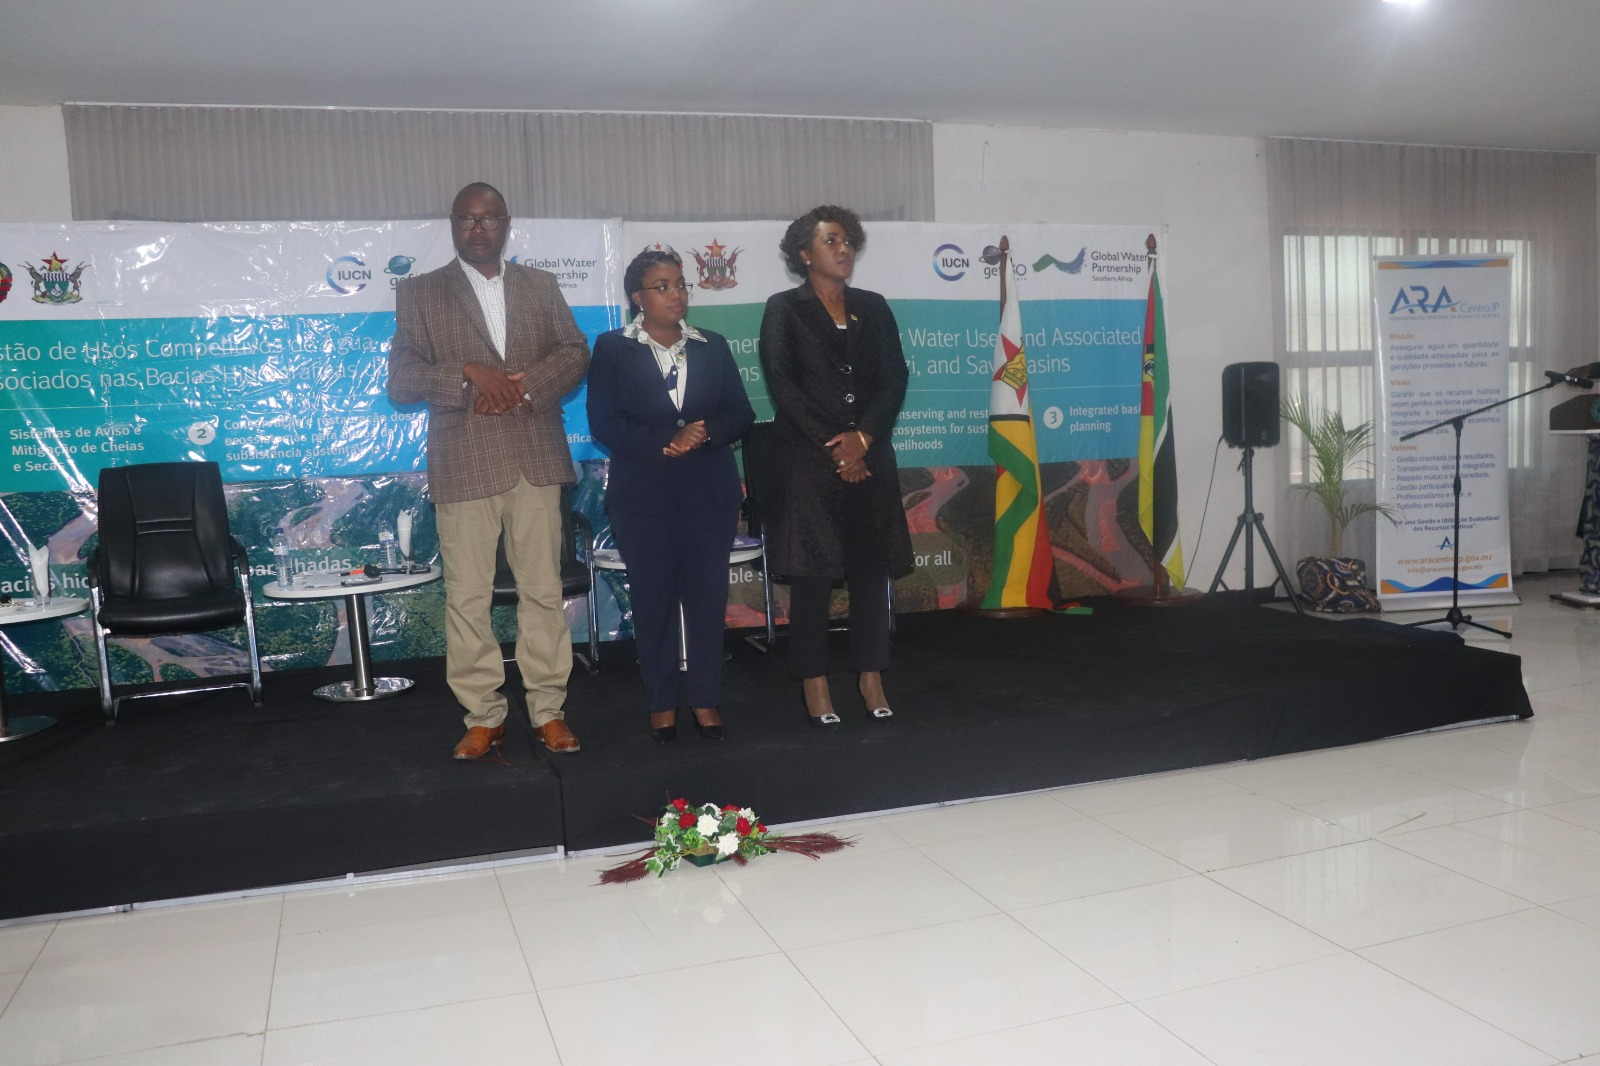 From left: Hon. Davis Mharapira, Deputy Minister of Lands, Agriculture, Fisheries, Water, and Rural Development of Zimbabwe, Hon. Cecilia Chamutota, Deputy Minister of Public Works, Housing and Water Resources of Mozambique and  Stela Zeca Pinto, the State Secretary of Sofala Province at the launch of  BUPUSACOM in Beira, Mozambique.